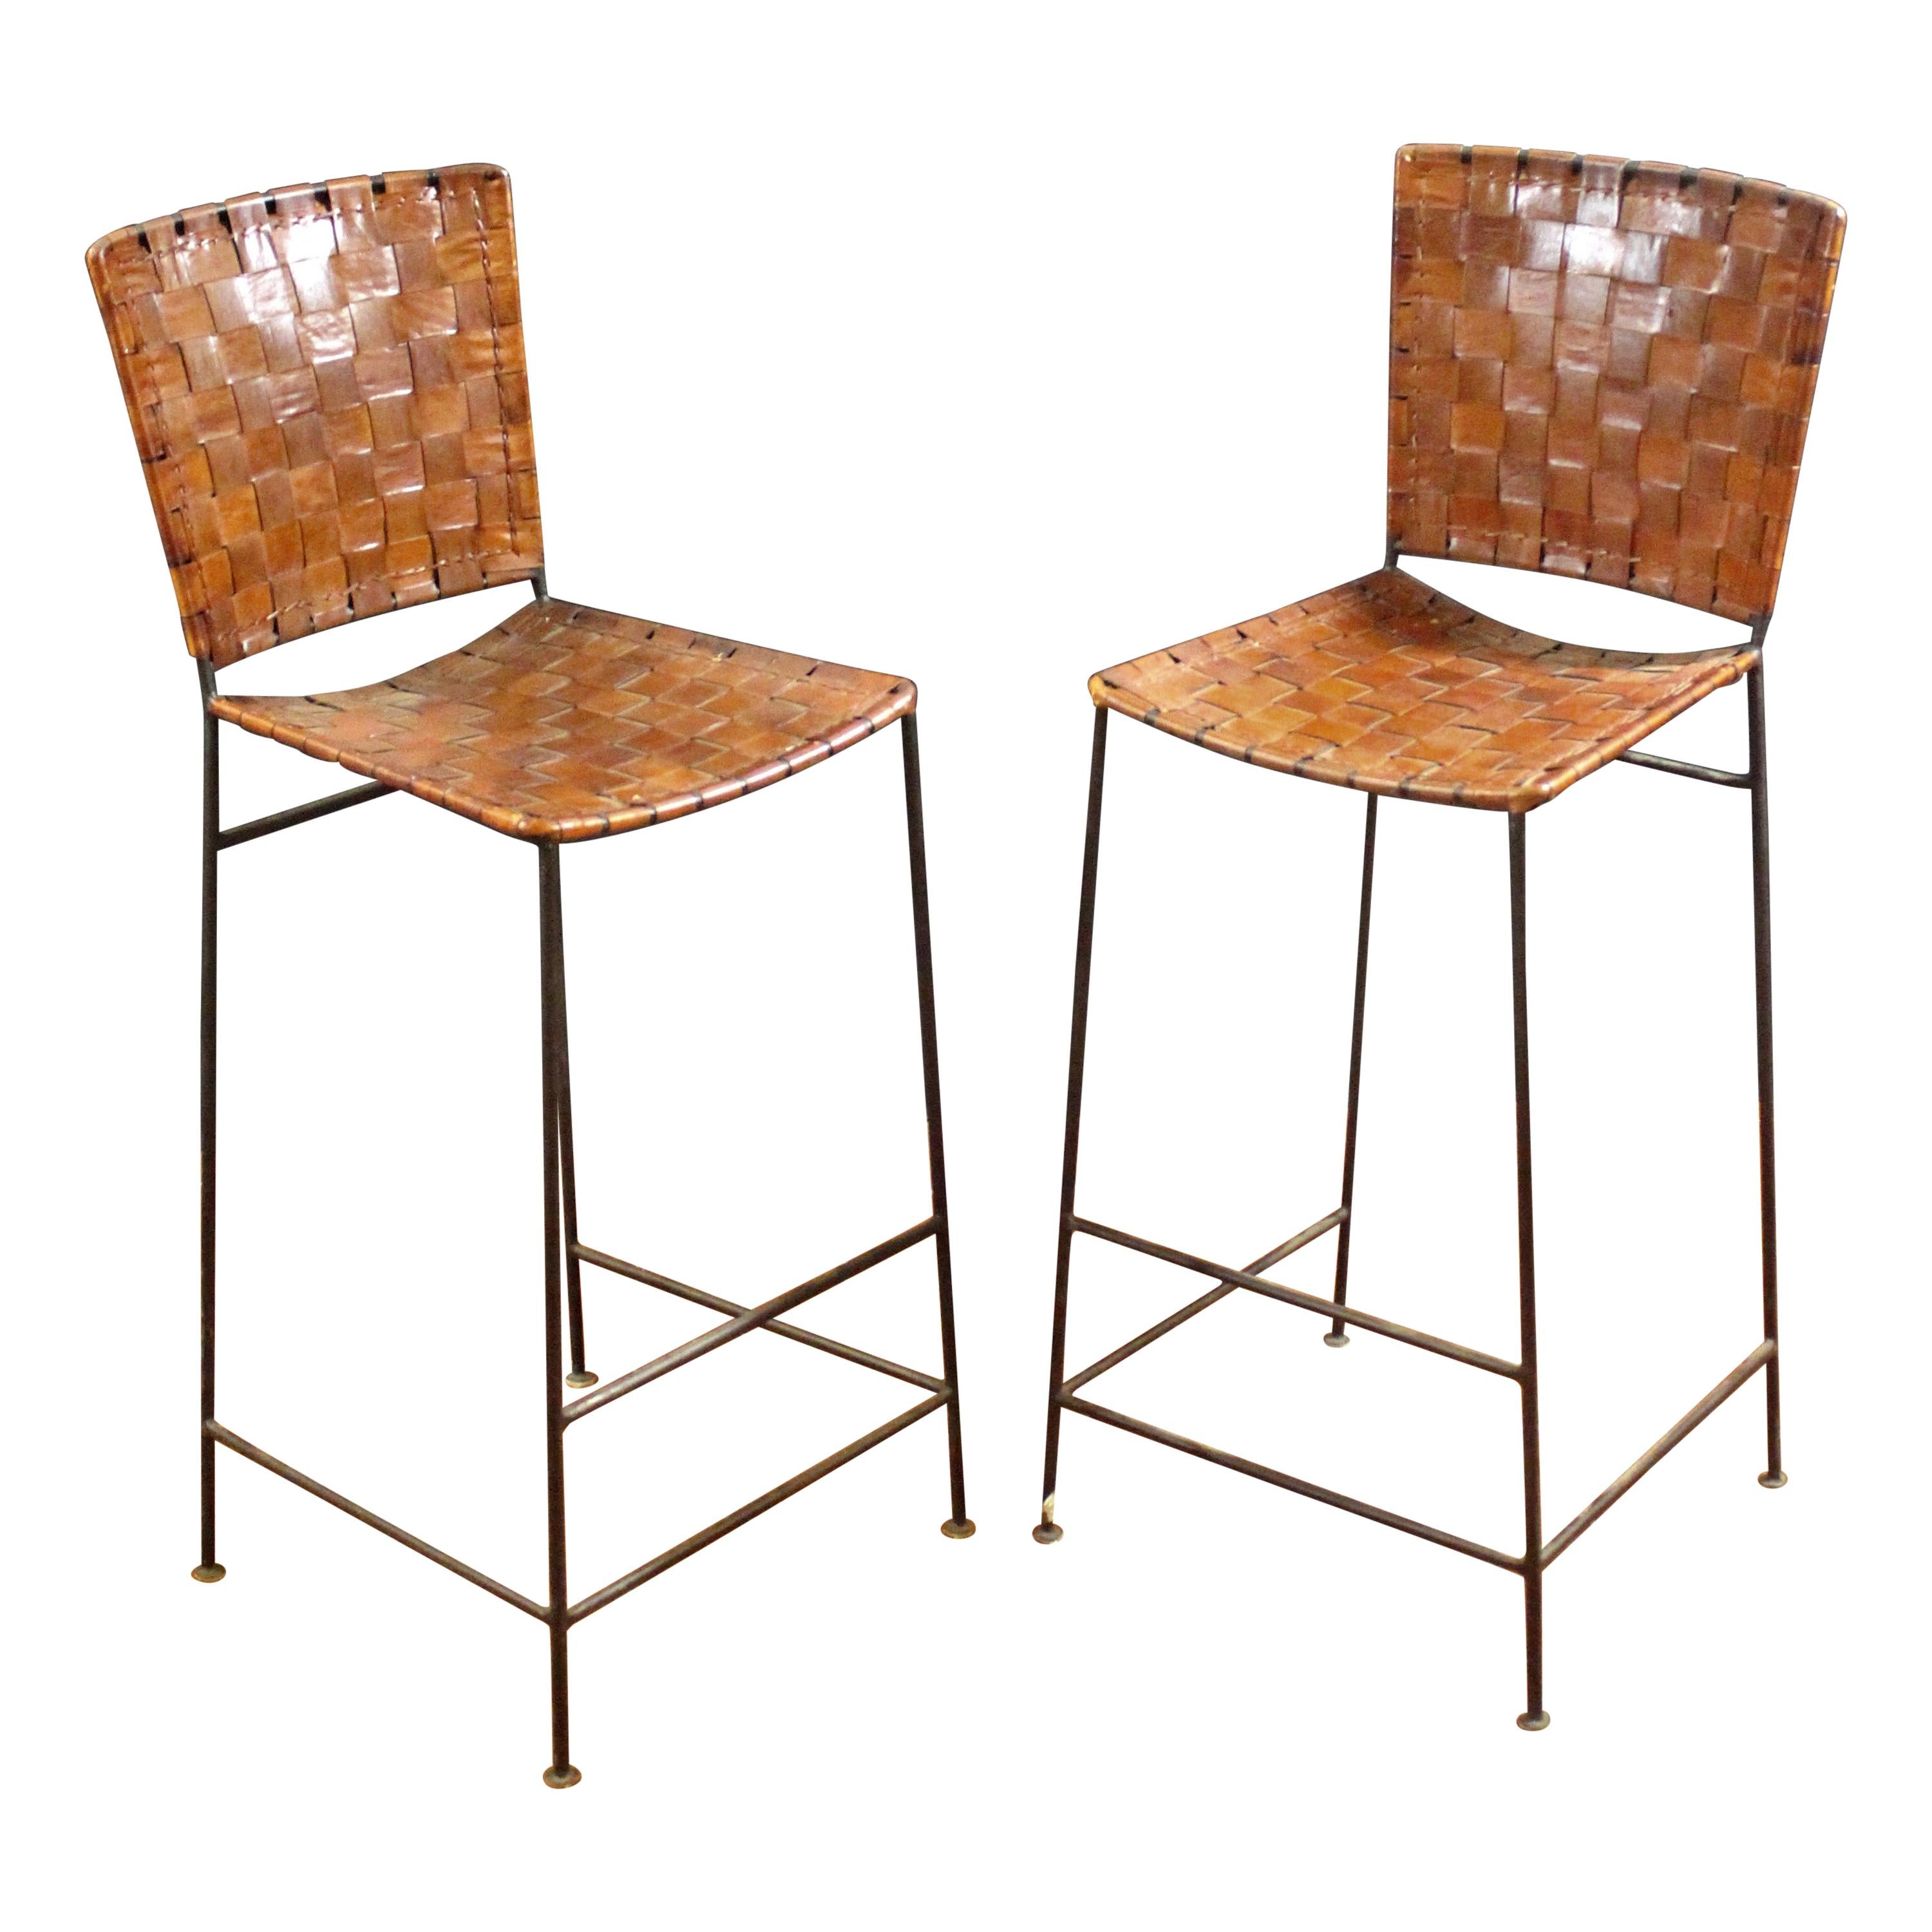 Pair of Bar Stools in Woven Saddle Brown Leather